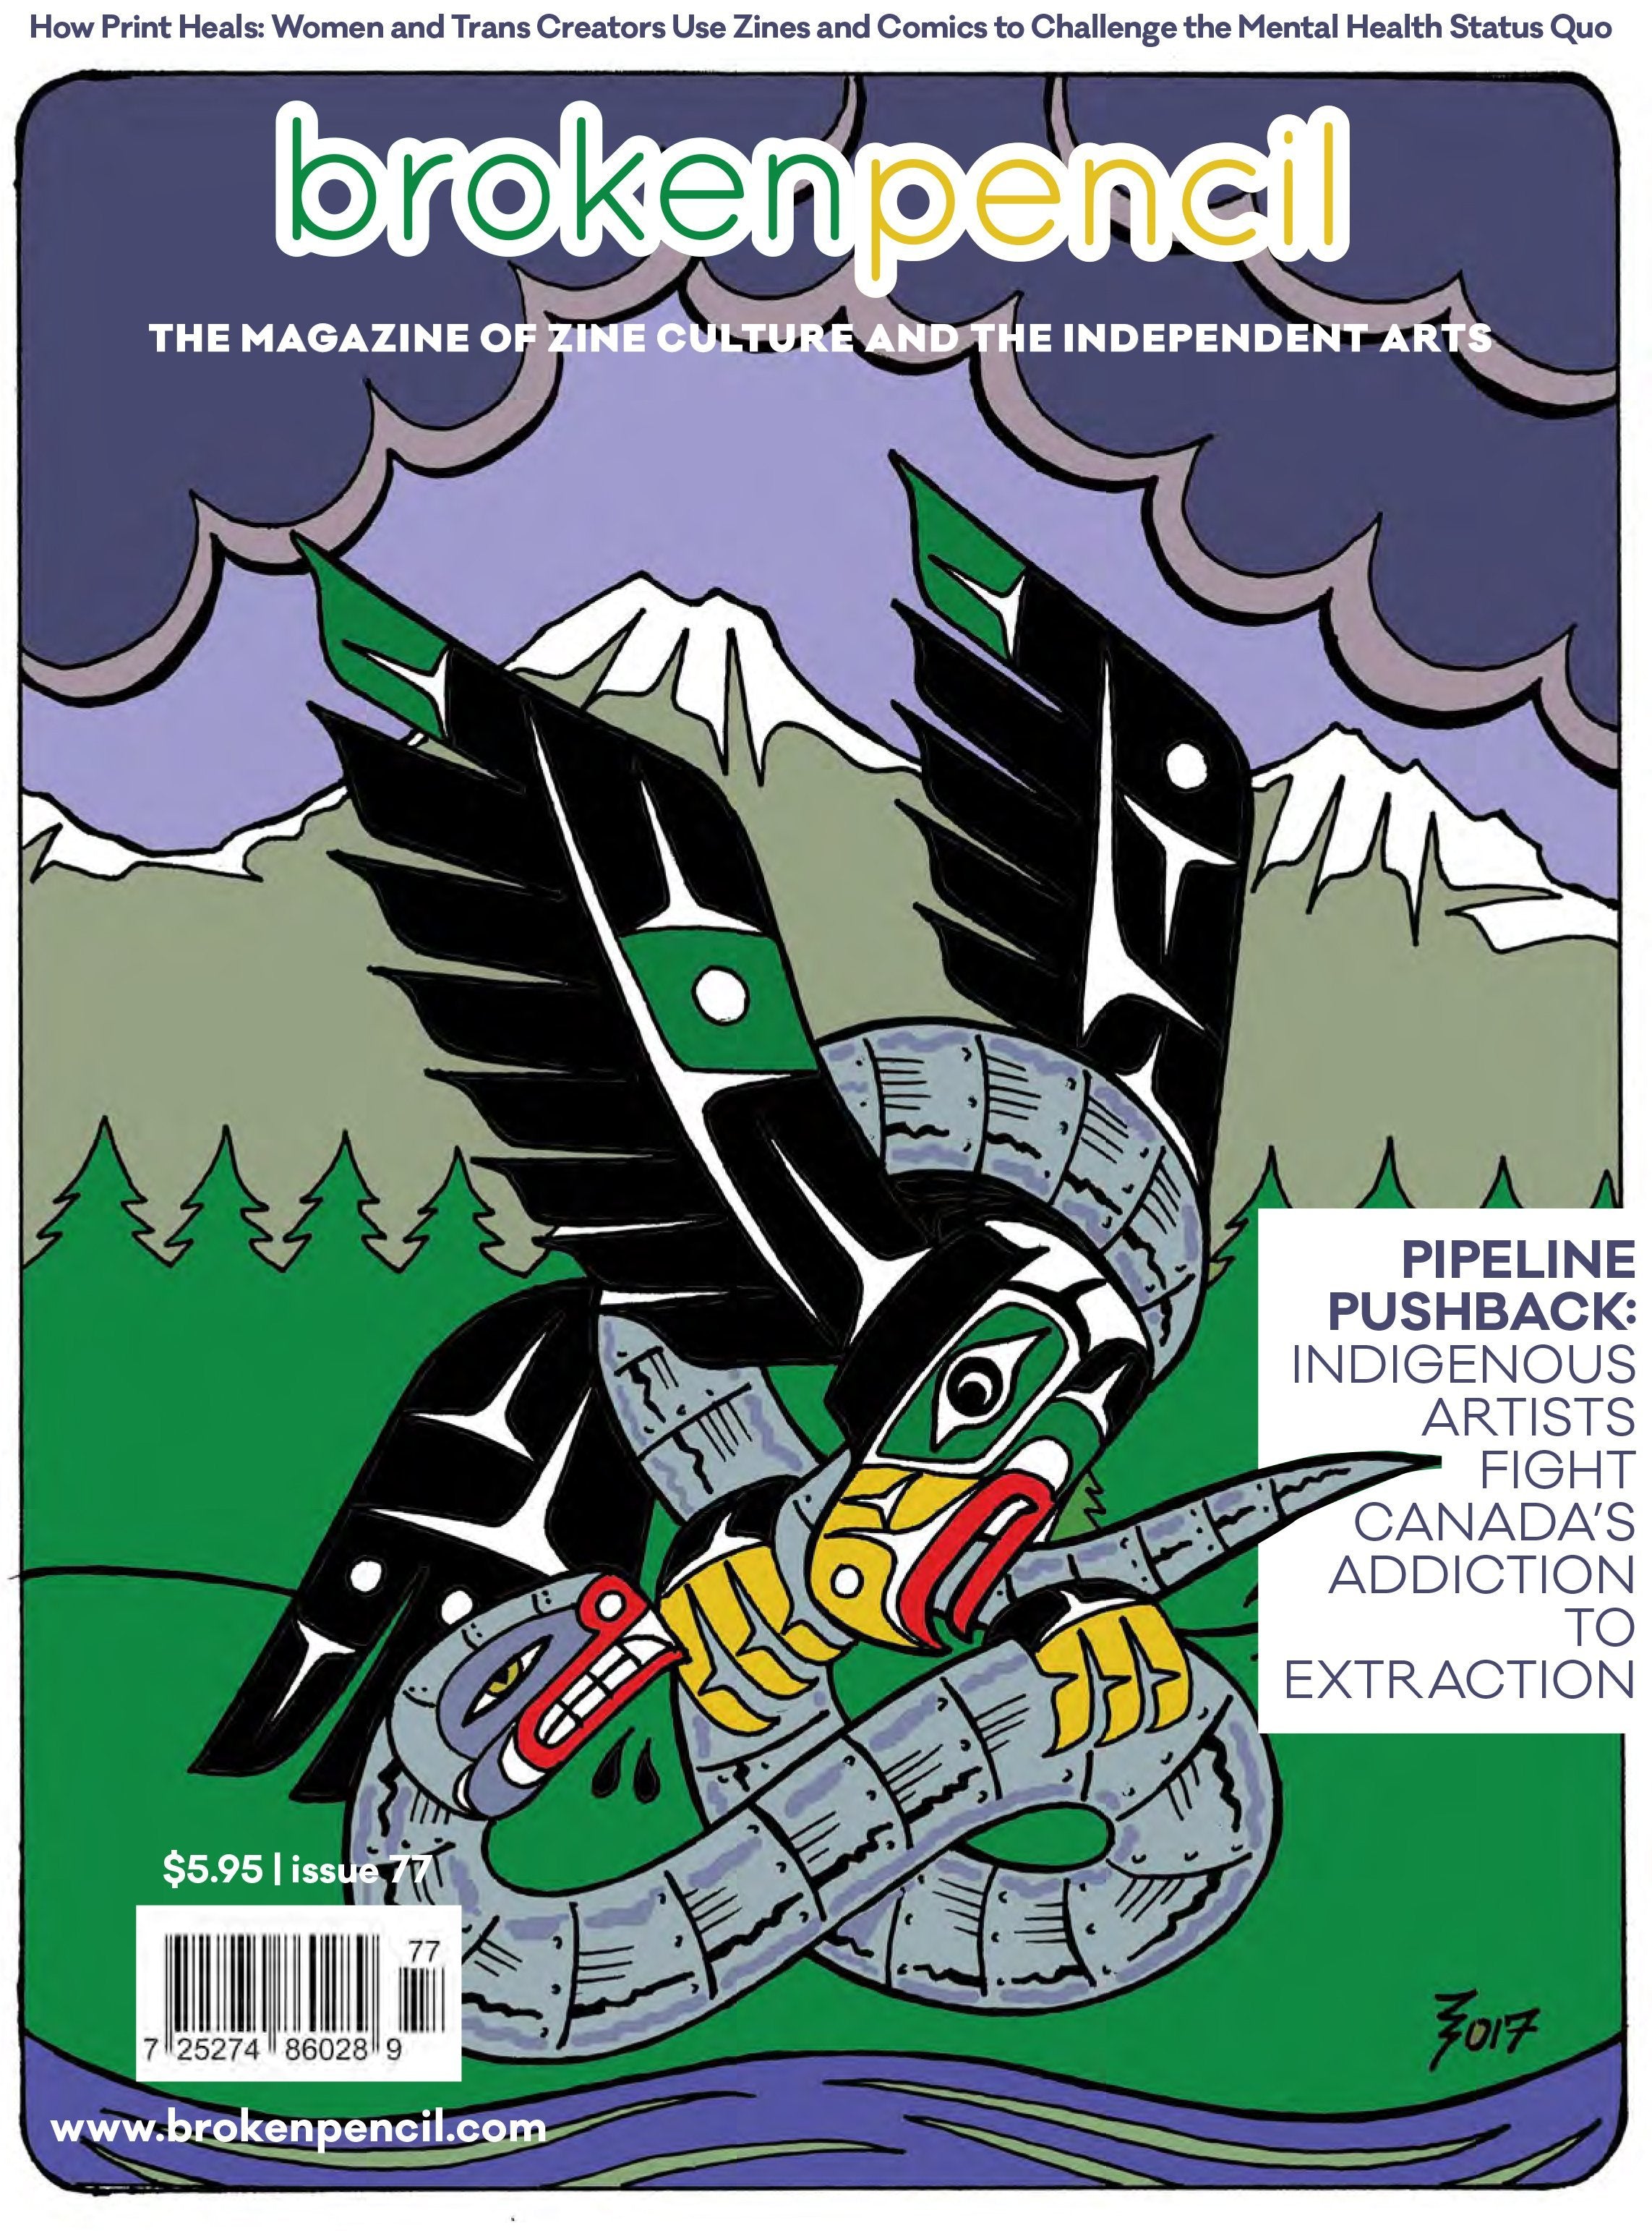 Issue 77: Pipeline Pushback - Indigenous Artists Battle Extraction Addiction